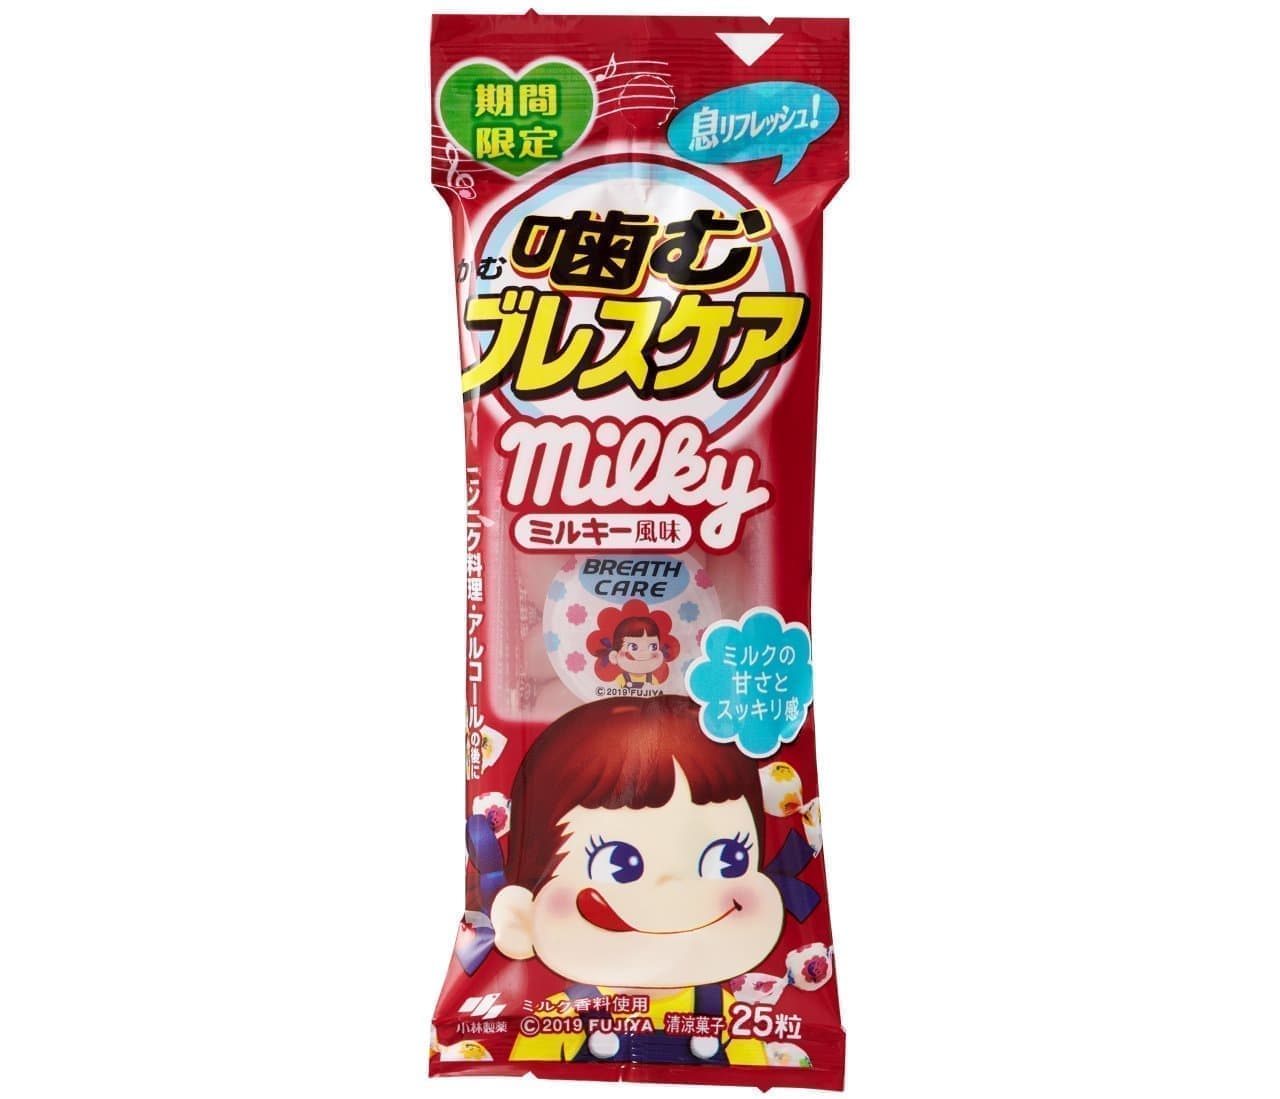 Chew Breath Care Milky Flavor" in limited quantities